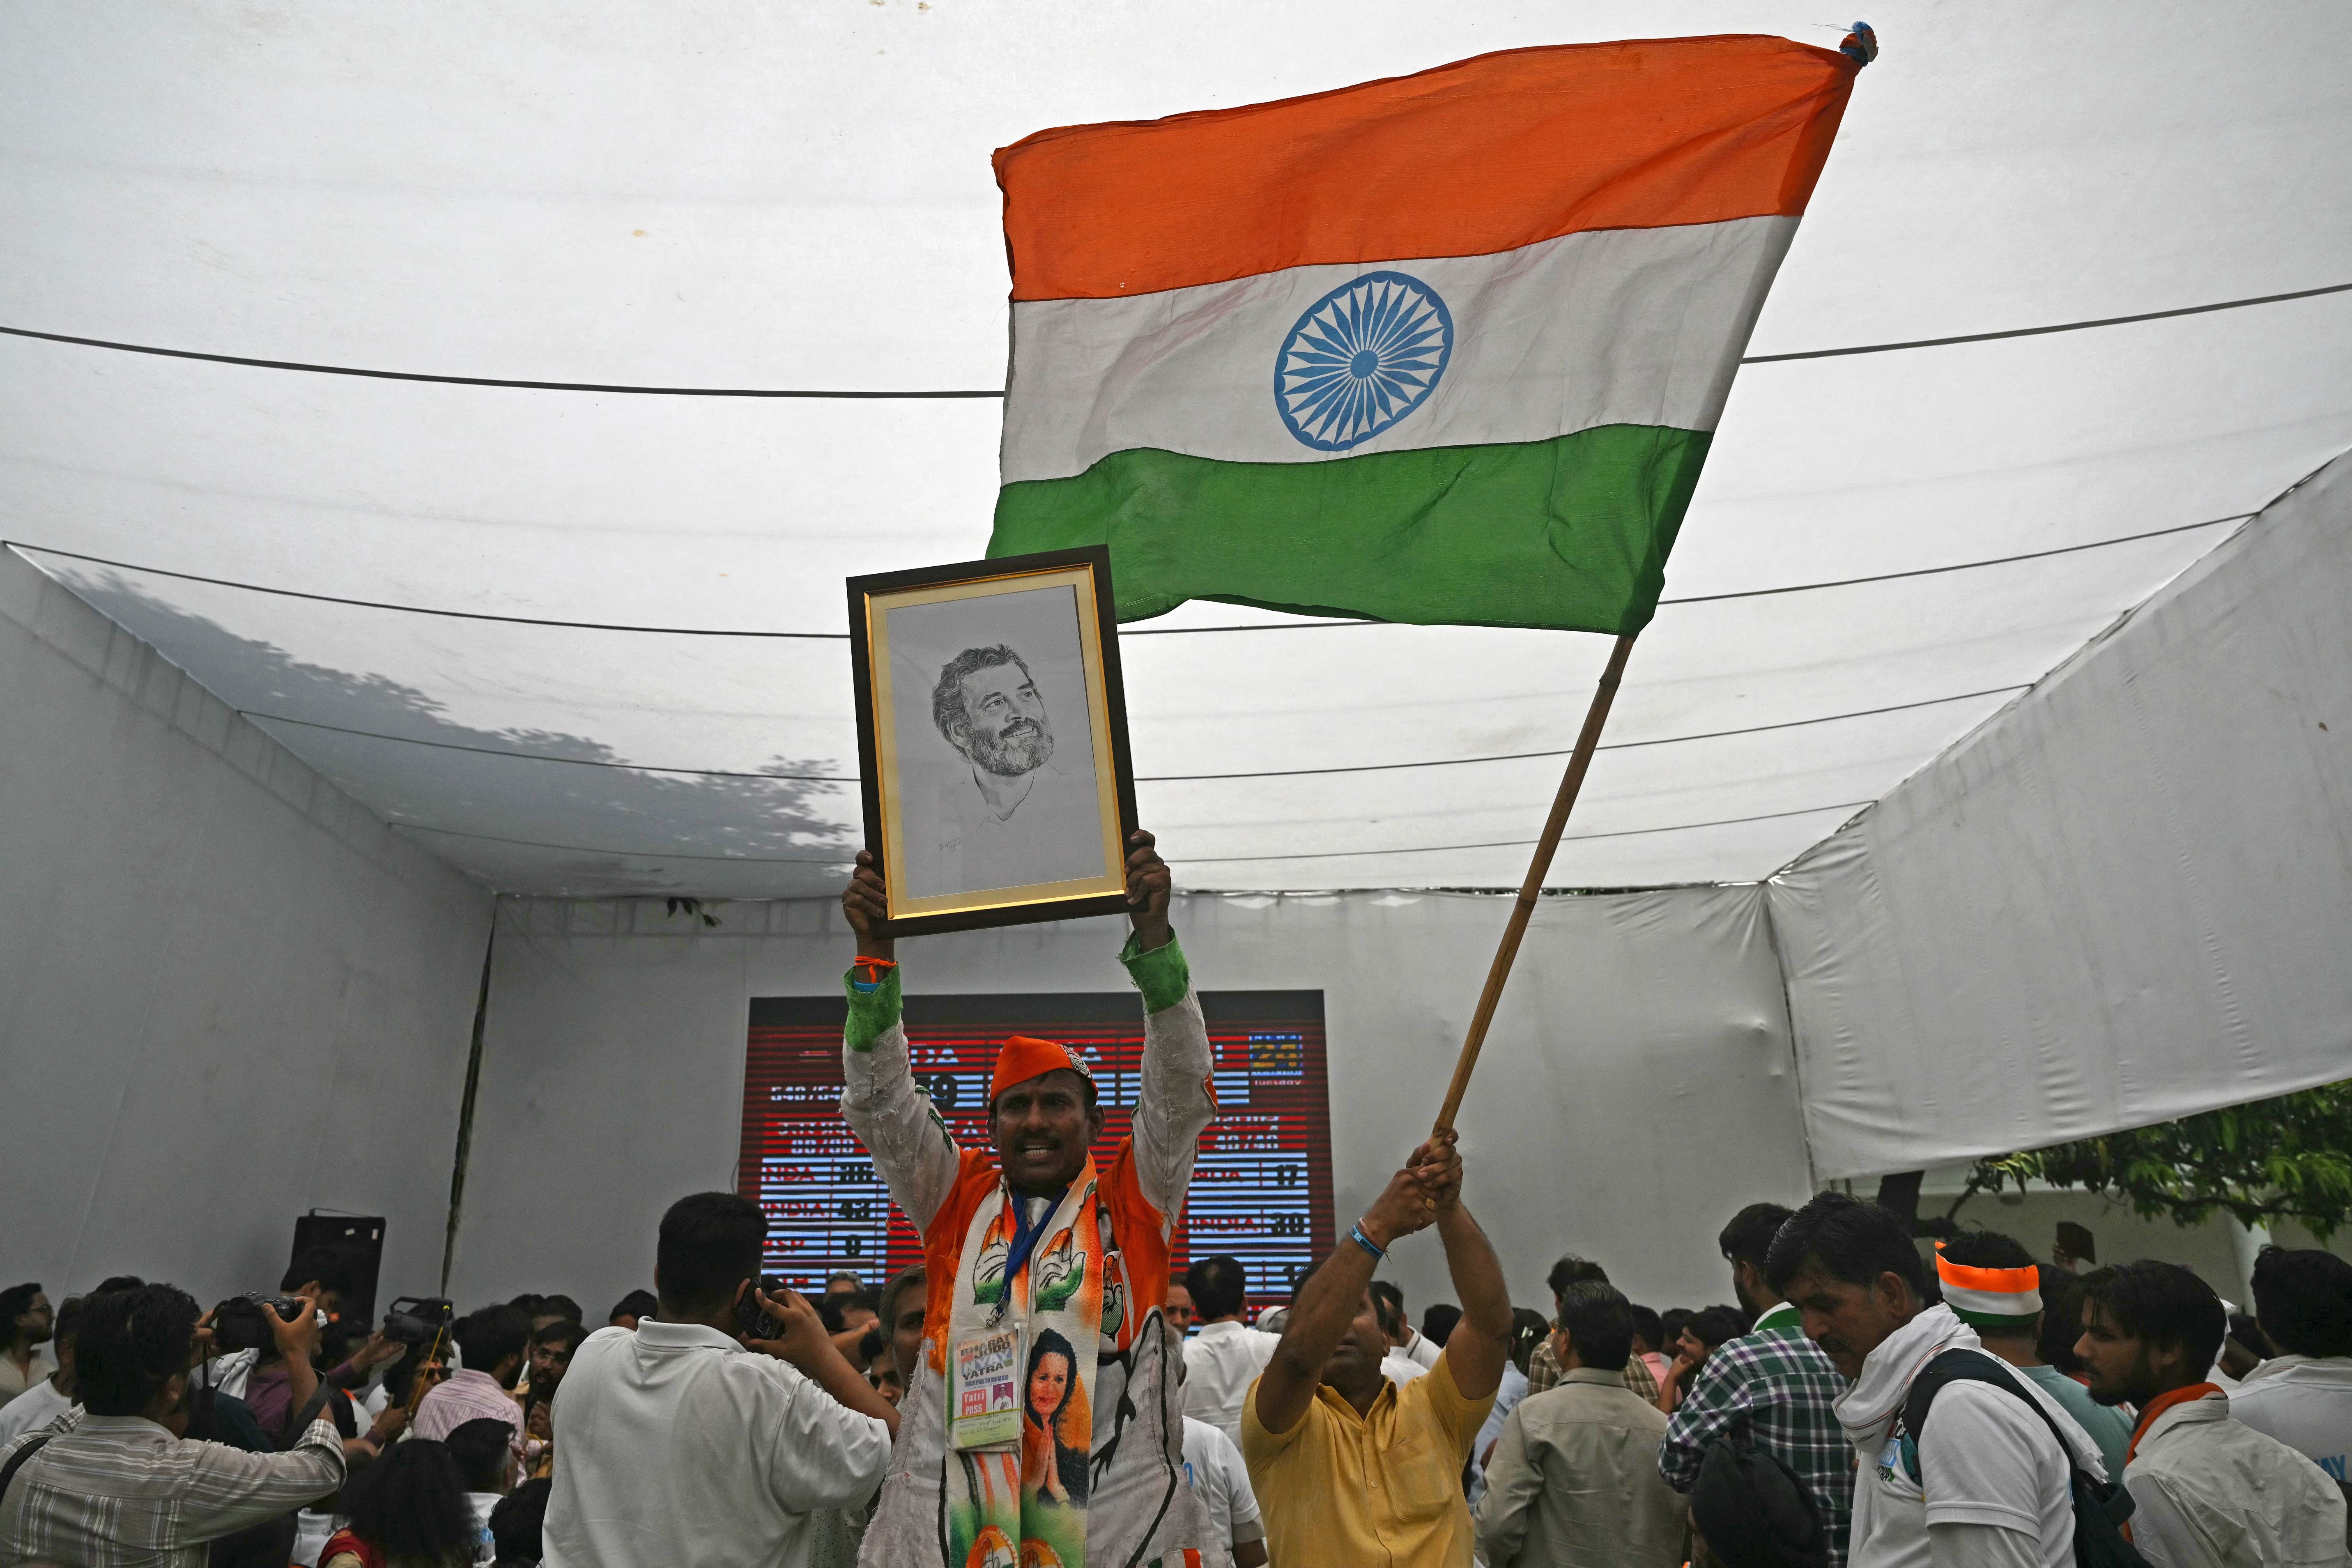 Supporters of the Congress party hold a portrait of Rahul Gandhi and wave India’s national flag after the votes were counted in India’s national election, in Delhi on 4 June 2024